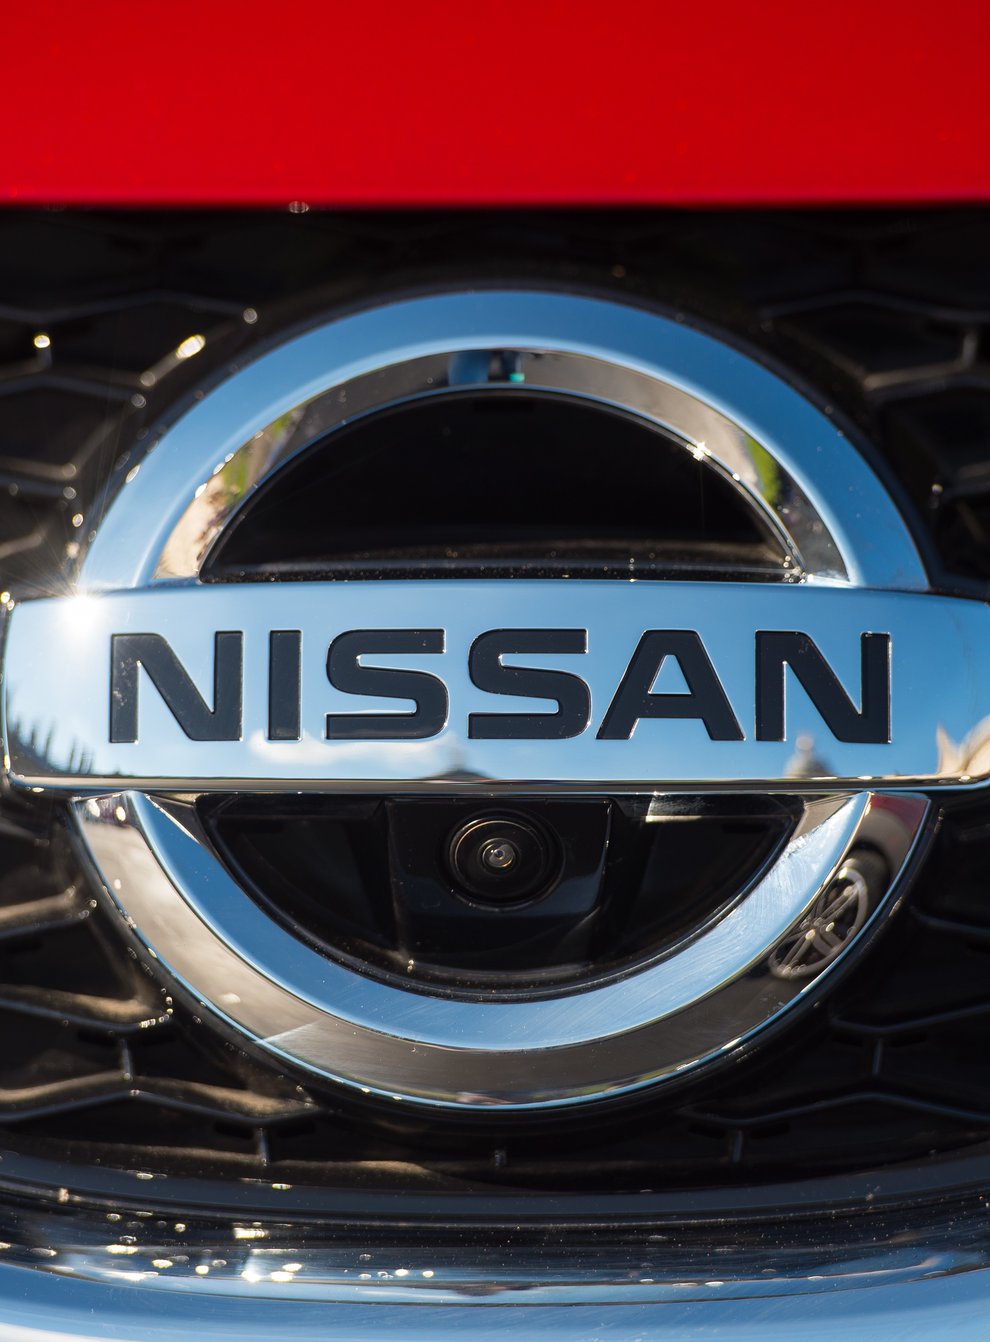 Up to 100,000 petrol Nissan Qashqai cars and more than a million other diesel Nissan and Renault vehicles could be fitted with prohibited 'defeat devices', a law firm has claimed (Dominic Lipinski/PA)